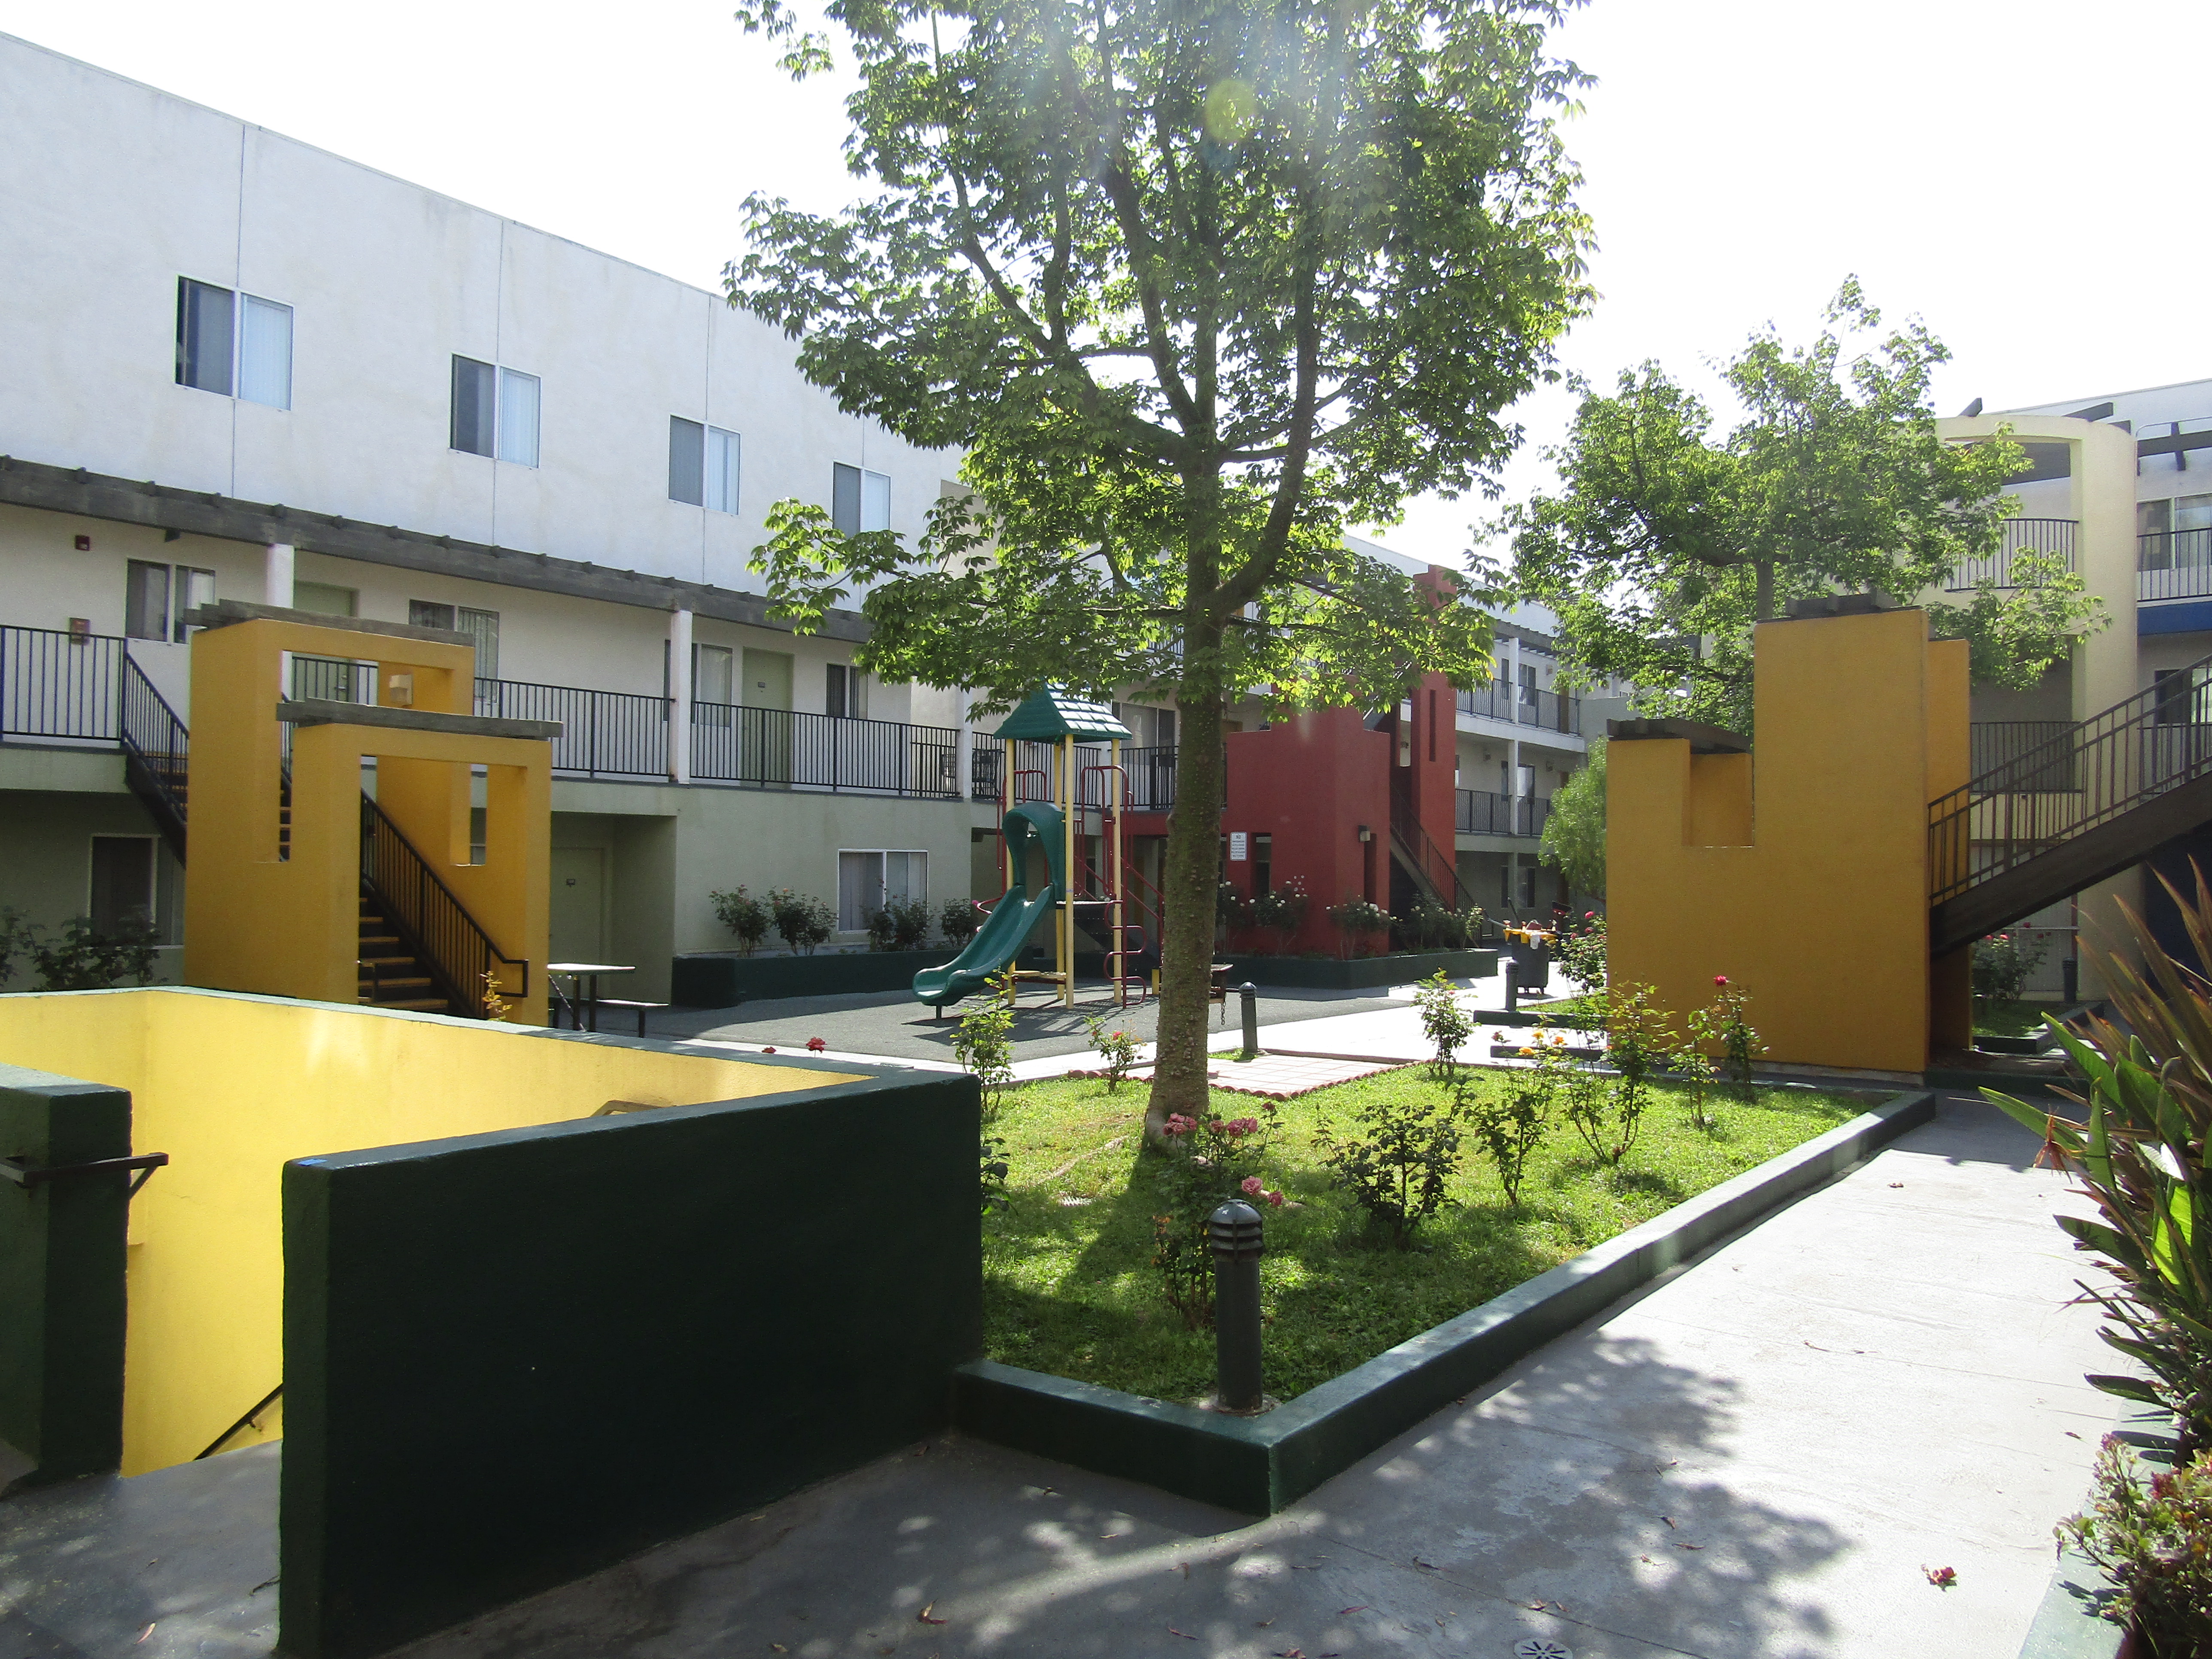 Image of the building courtyard and playground